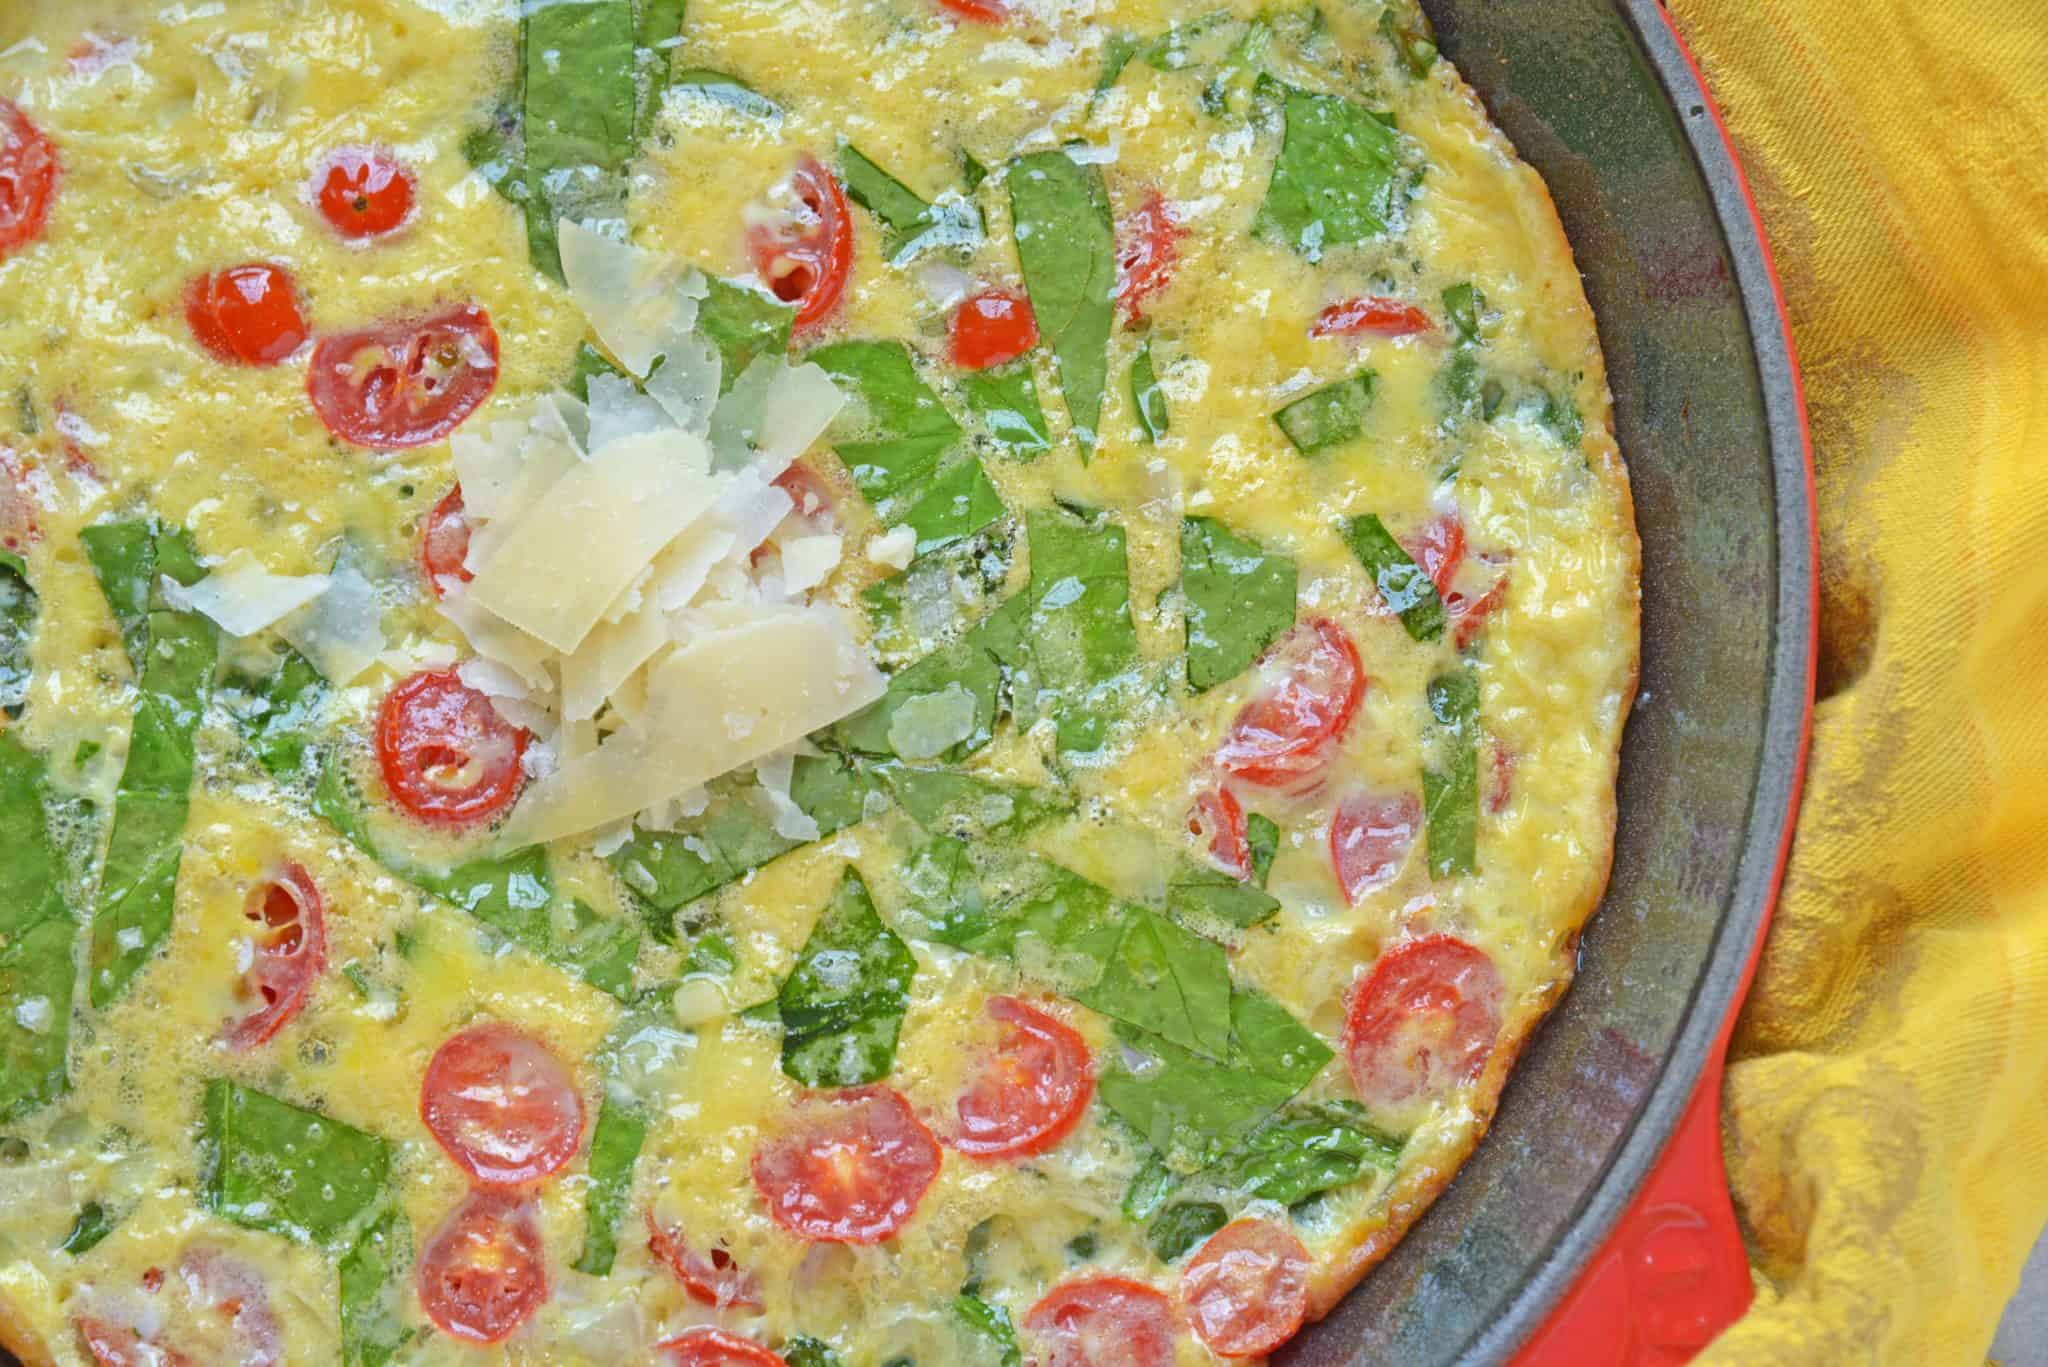 This Tomato Spinach Frittata recipe is excellent for breakfast or brunch, packed full of delicious flavors from tomatoes, spinach, shallots, and parmesan cheese! #spinachfrittata #breakfastfrittatarecipe www.savoryexperiments.com